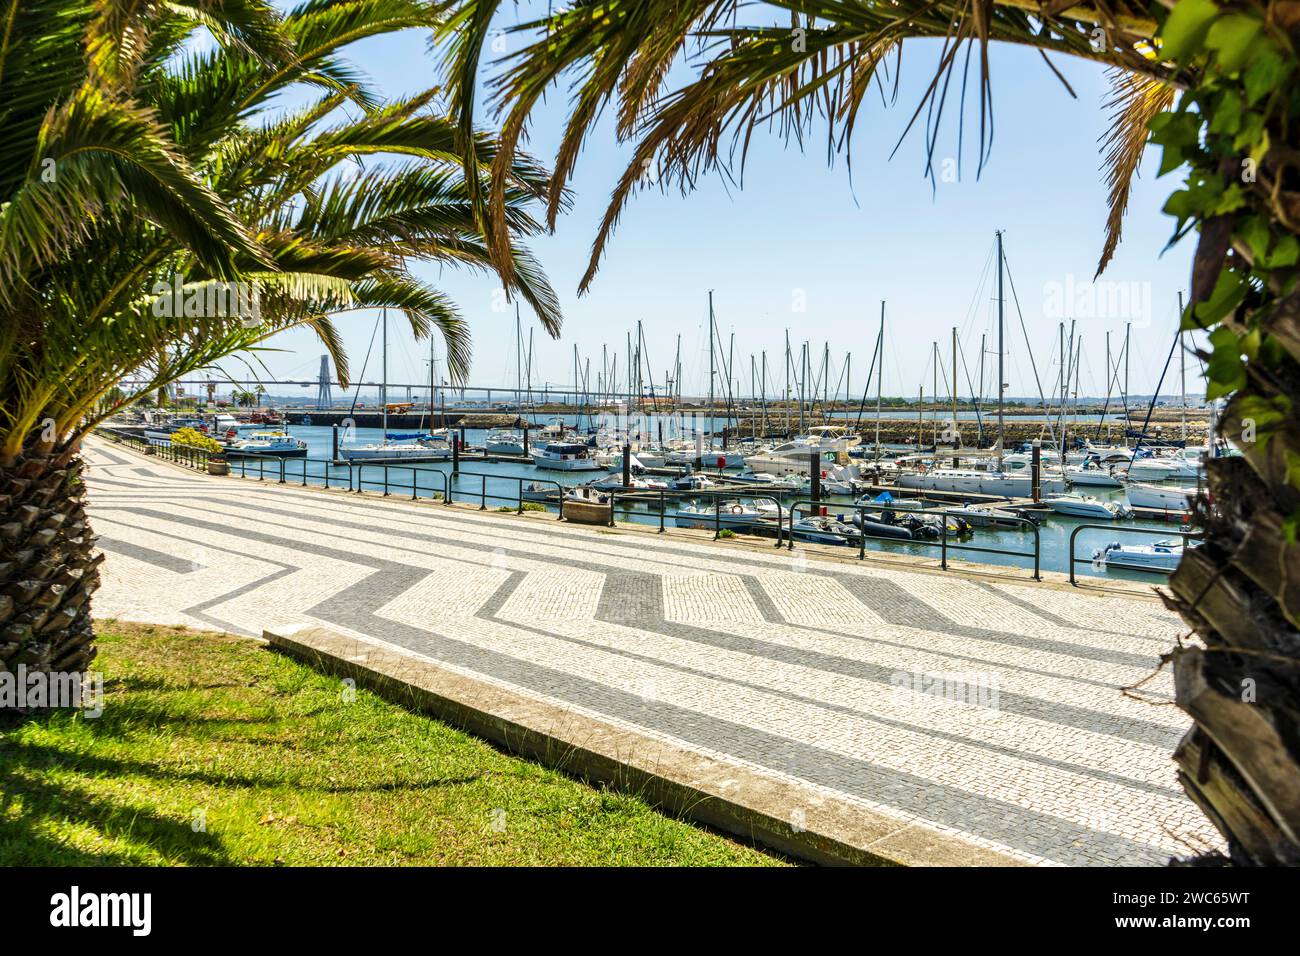 Beautiful view on a dock with boats and yachts, Figueira da foz Stock Photo